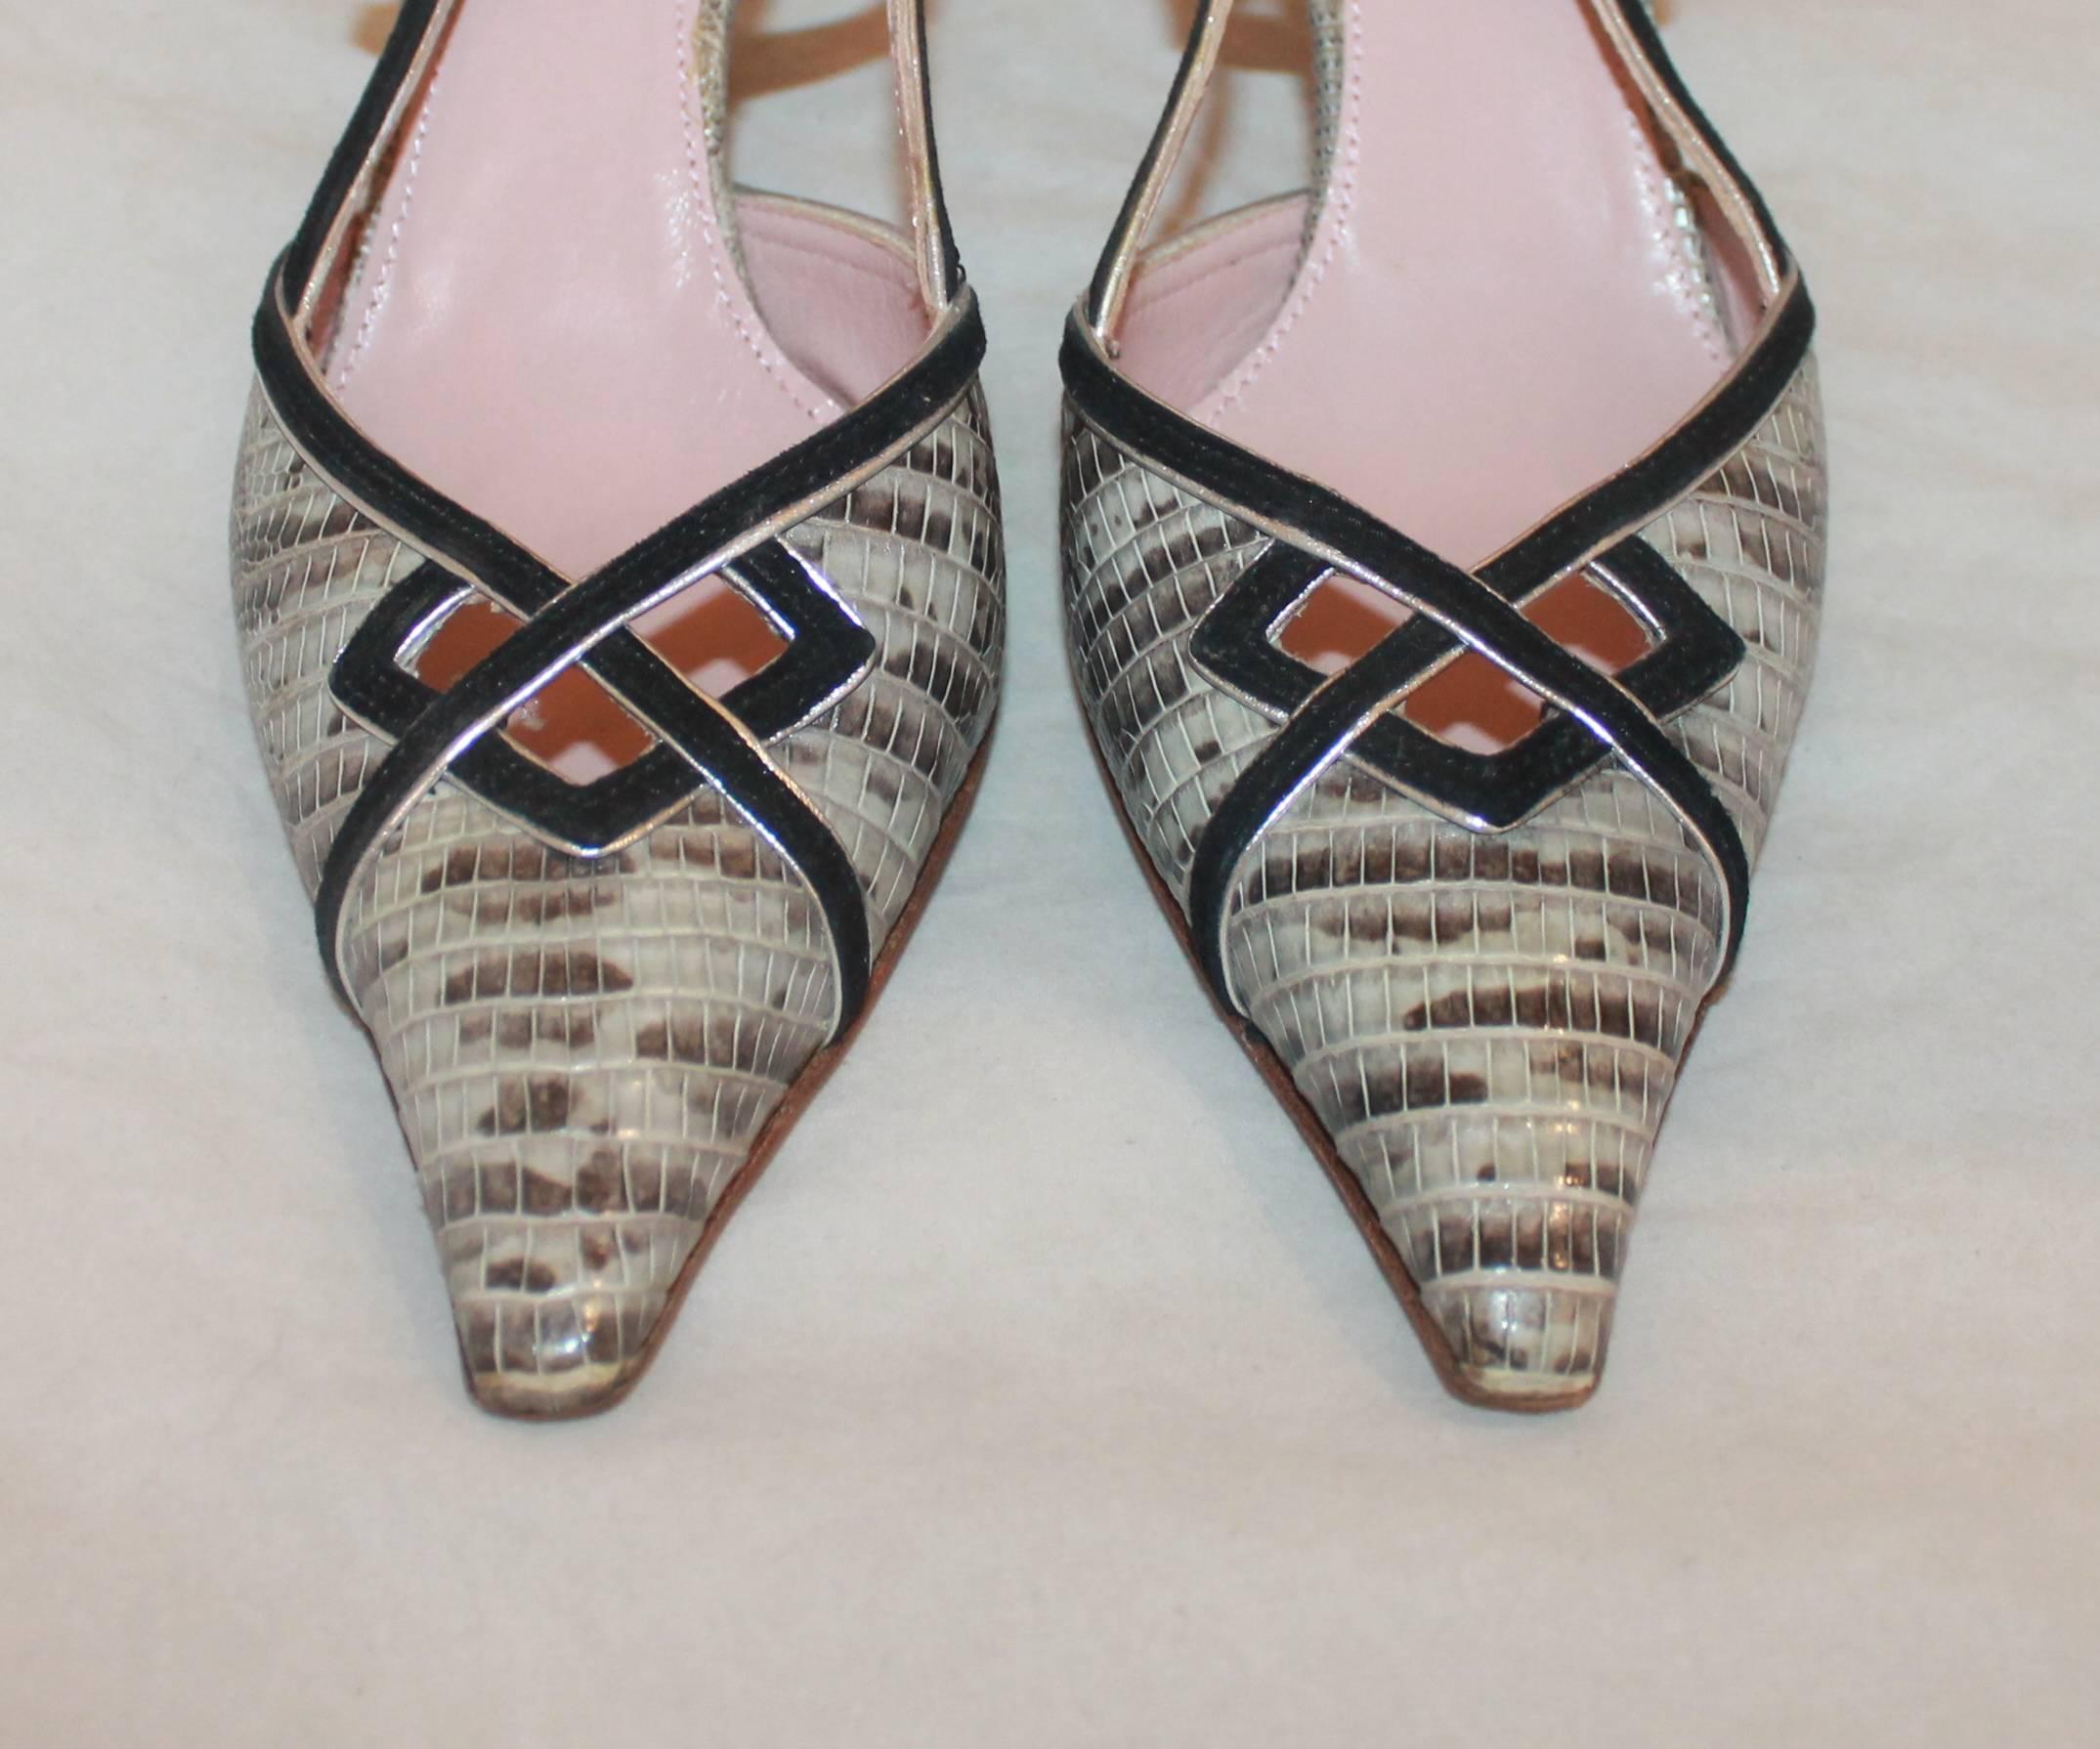 Prada Silver and Black Lizards and Suede Strappy Slingbacks - 35.5. These slingbacks are beige lizard skin with black and silver suede trim and cutouts on the top. They are in excellent condition with minor wear on the bottom.

Measurement
Heel: